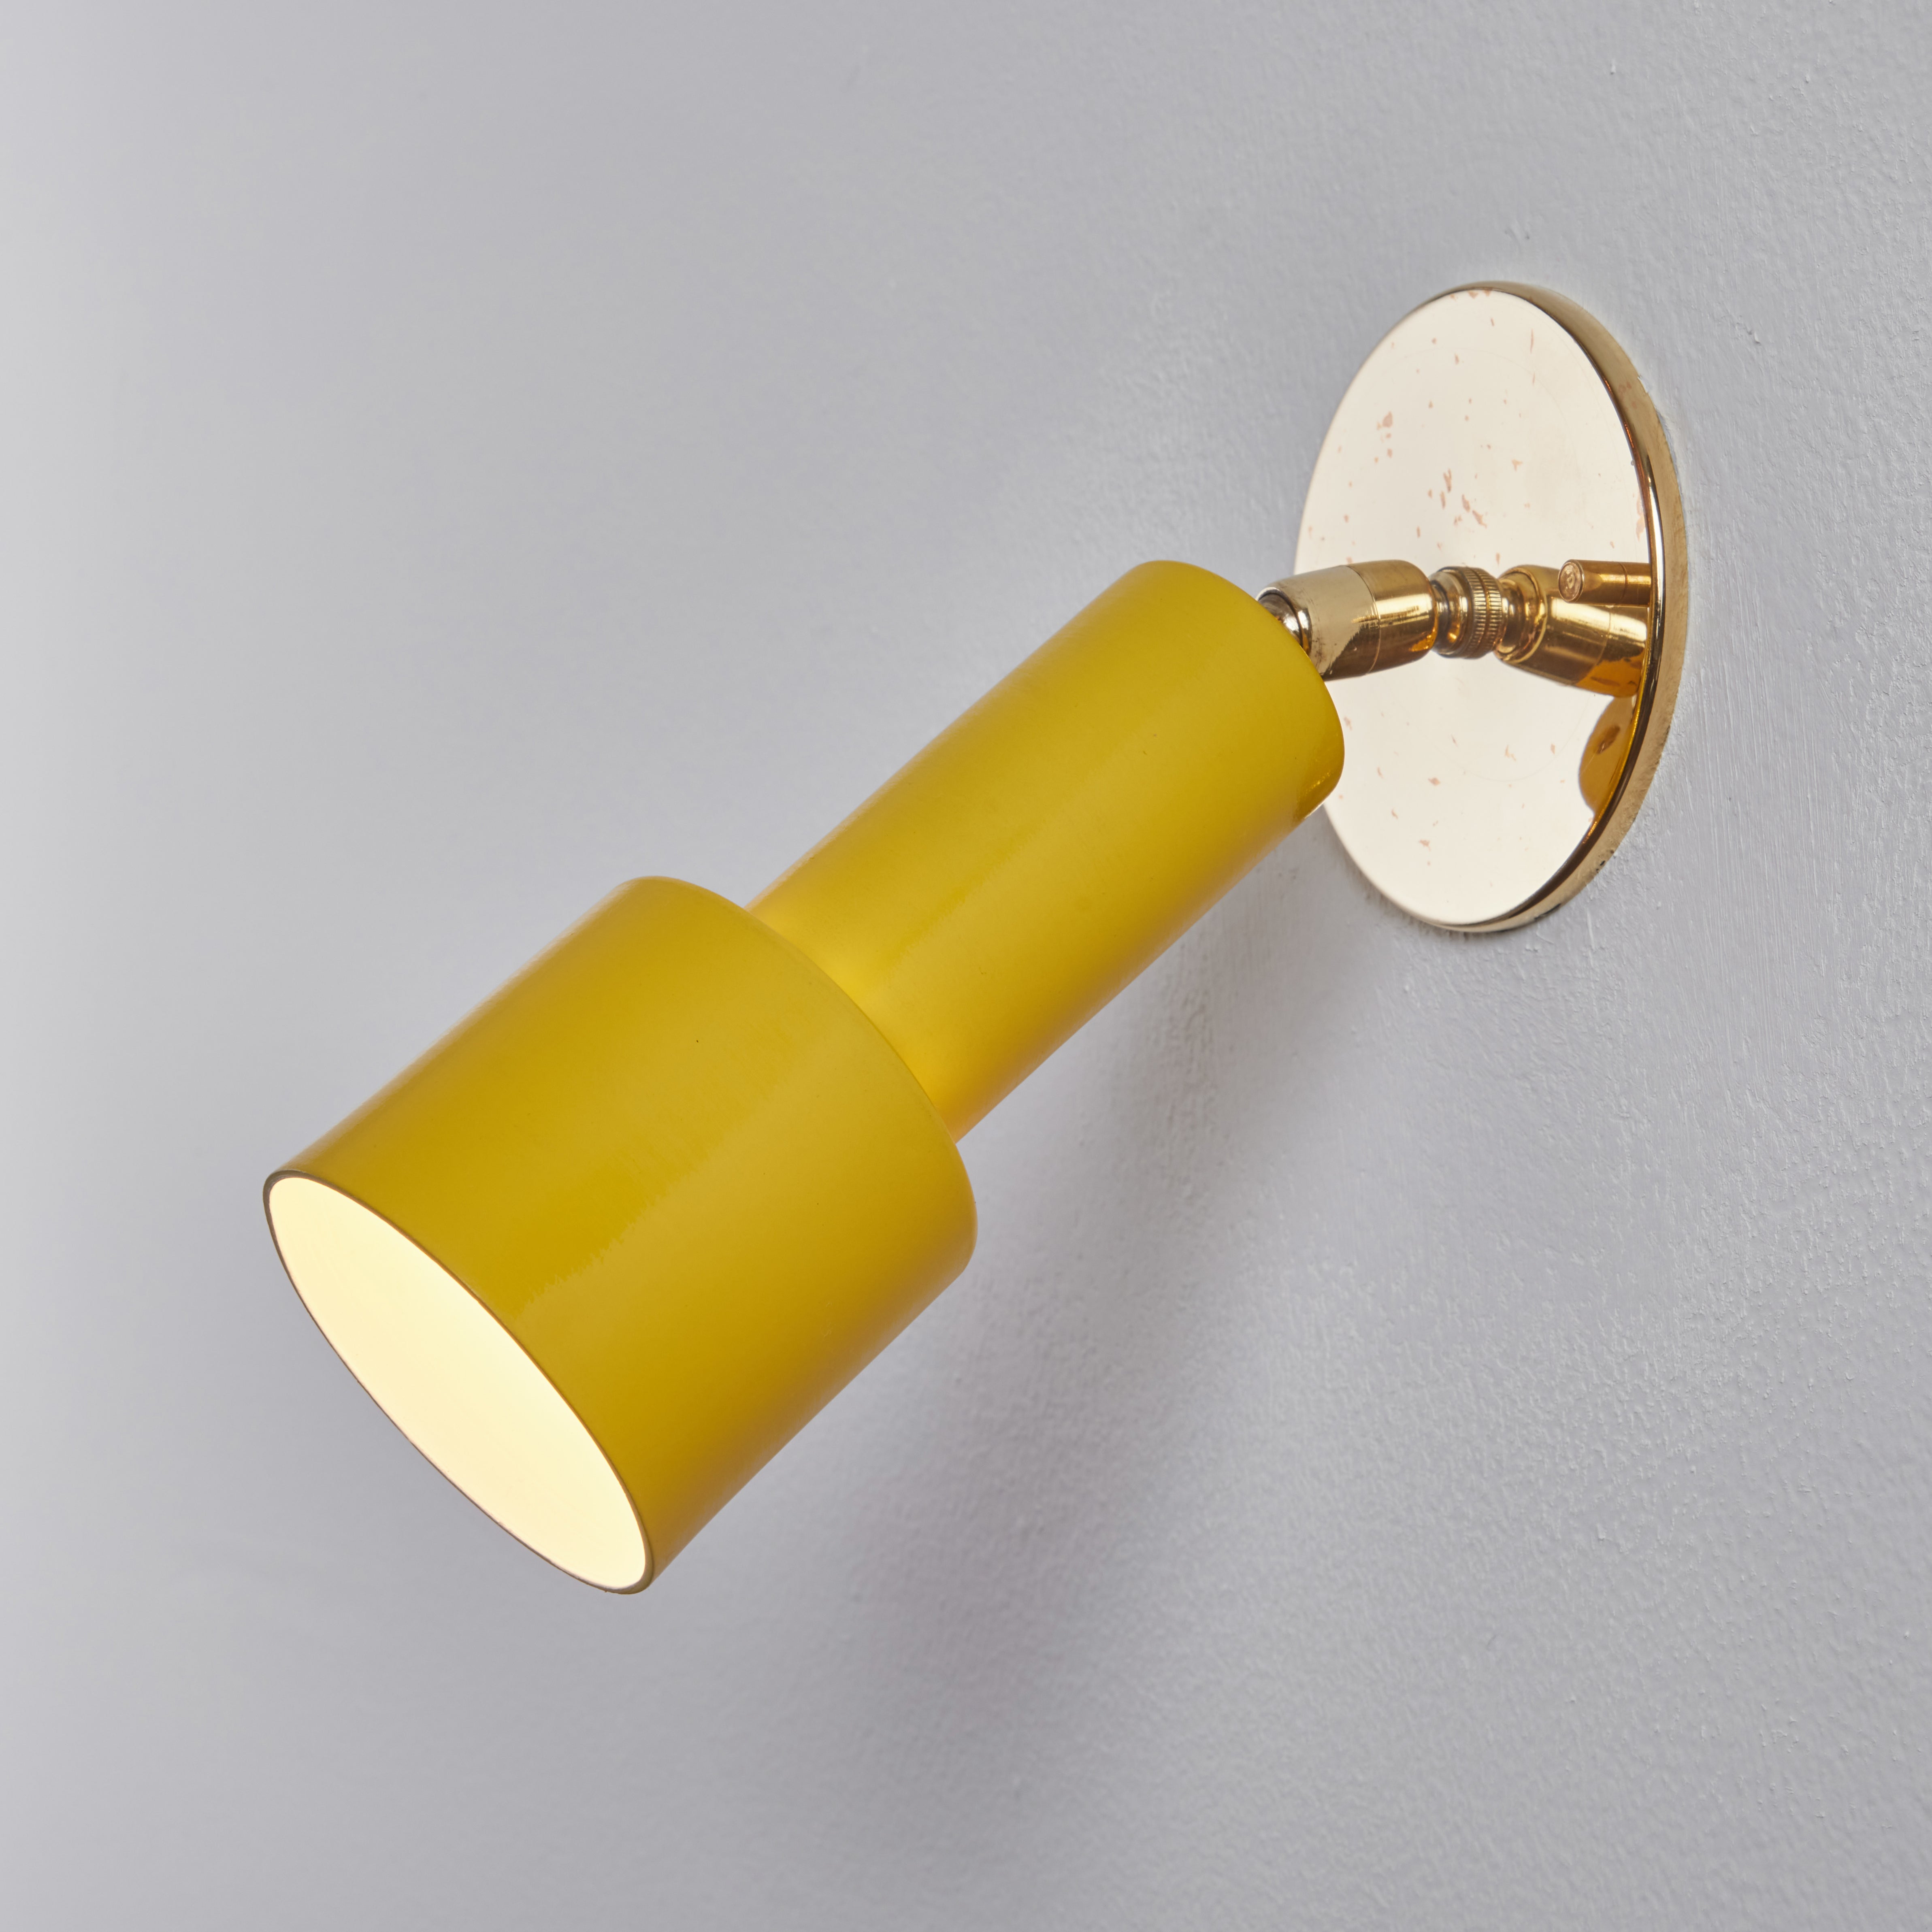 1960s Tito Agnoli perforated yellow metal & brass sconce for O-Luce. These iconic sconces are executed in yellow painted perforated metal and brass. Lamps rotate freely on highly adjustable double swivels. An incredibly clean and refined design by